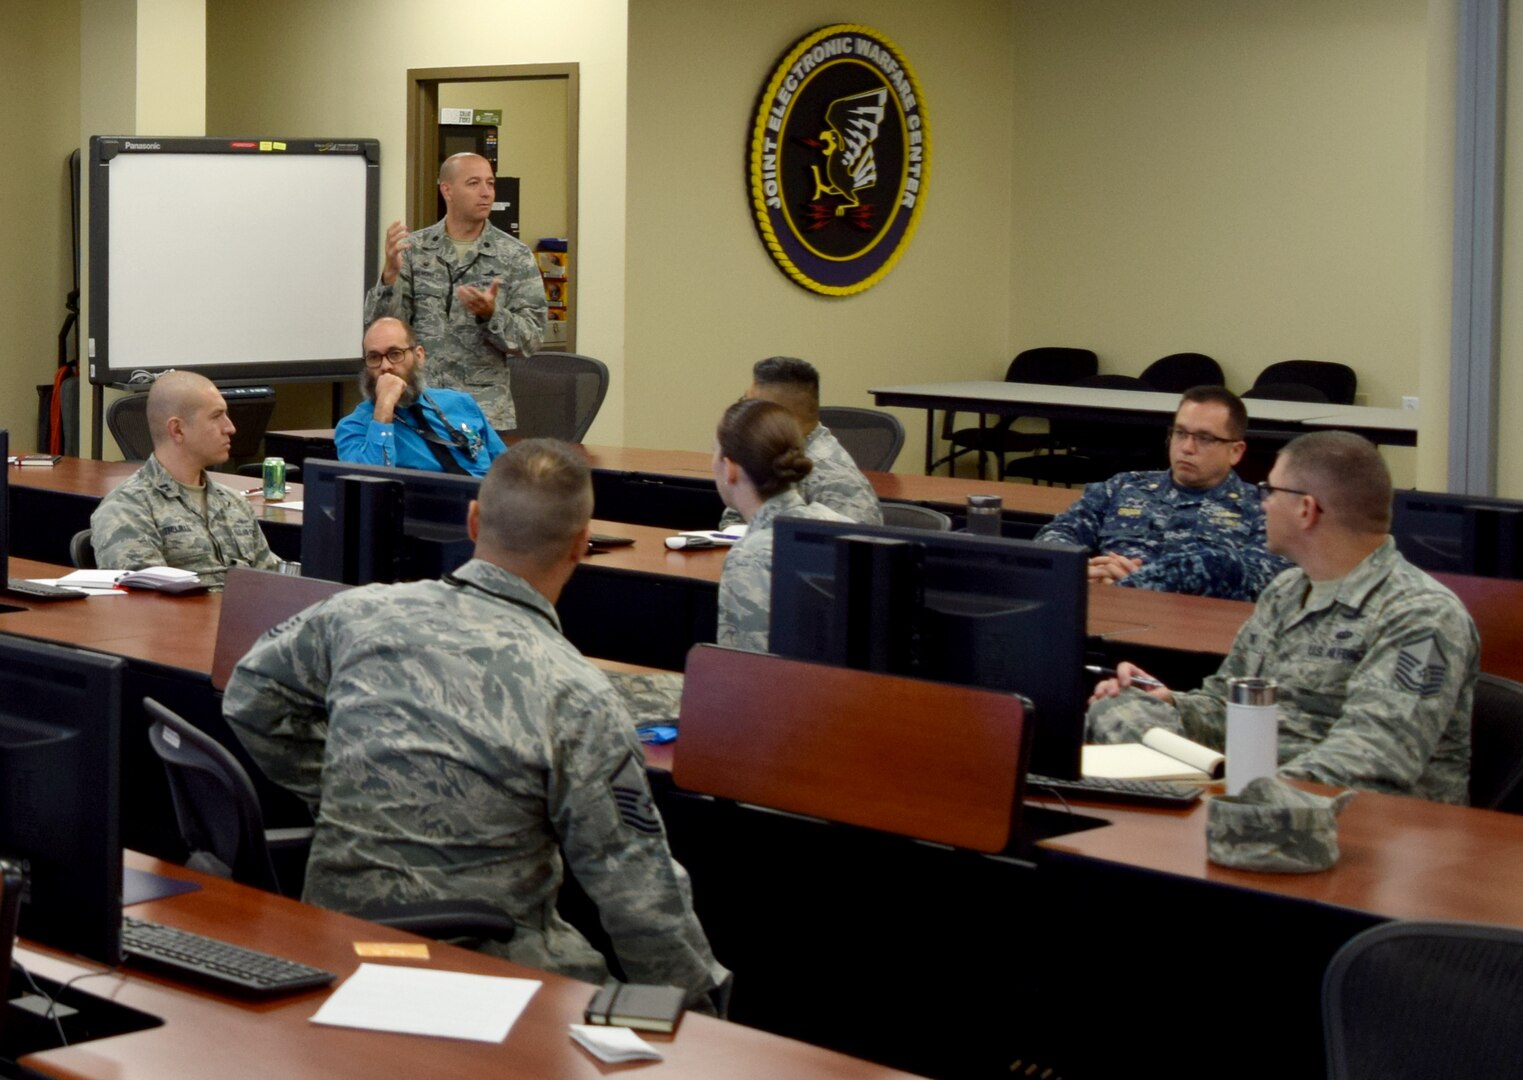 Total Force and joint cyber professionals discuss cyber protection team best practices during Cyber Protection Team Conference 18-1 at Joint Base San Antonio-Lackland, Texas, June 27, 2018. The three day, 567th Cyberspace Operations Group-hosted conference gathered cyber professionals to collaborate on operational CPT improvements. U.S. Cyber Command CPTs defend national and DOD networks and systems against threats, as part of the combatant command’s Cyber Mission Force.